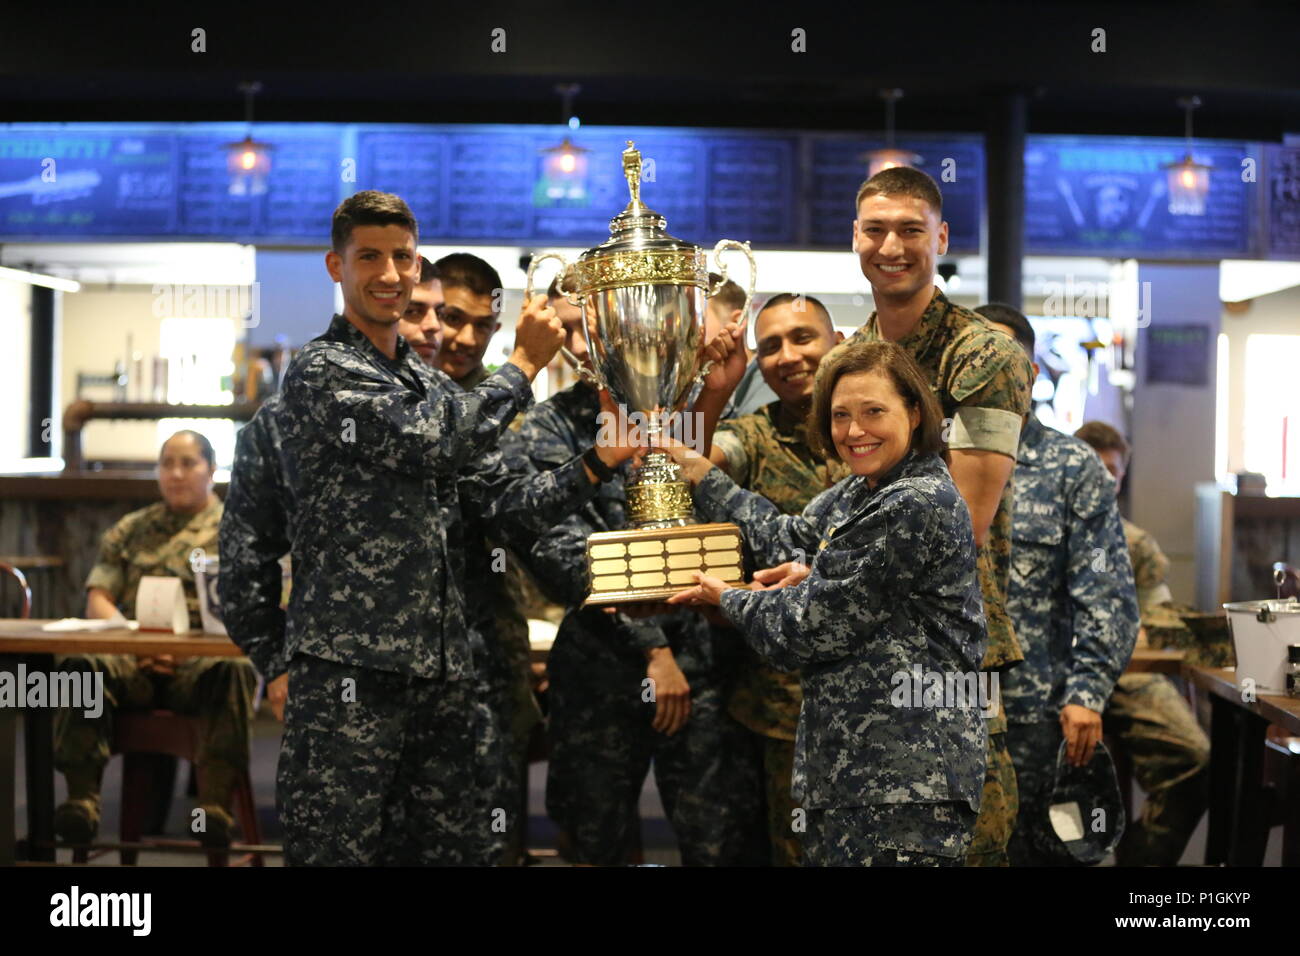 The Naval Health Clinic Cherry Point soccer team, along with Navy Capt. Angela Nimmo, celebrates winning the coveted Cherry Point intramural sports trophy aboard Marine Corps Air Station Cherry Point, N.C., Oct. 27, 2016. Cherry Point’s Semper Fit program annually re-awards the trophy to the unit aboard the air station that wins the most championships throughout the year. Some of the sports they participated in include softball, basketball, football and soccer. Nimmo is the Naval Health Clinic Cherry Point commanding officer. (U.S. Marine Corps photo by Lance Cpl. Mackenzie Gibson/Released) Stock Photo